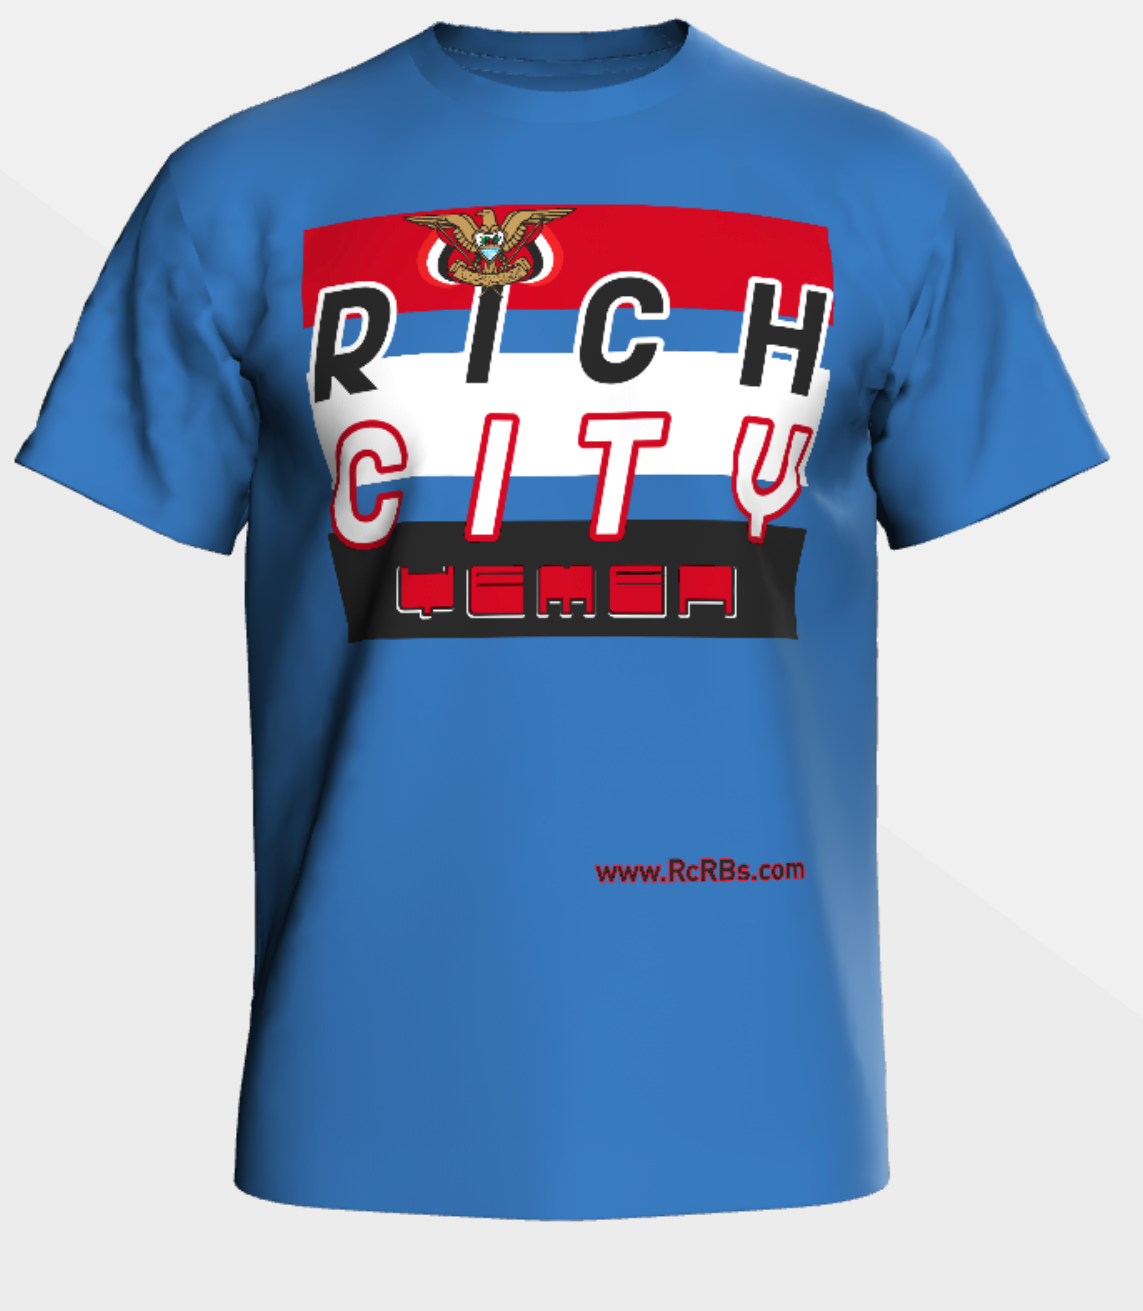 New 2023 RichCity Rides Bike/Skate Cooperative -"Yemen"- Sustainable Clothing Collection